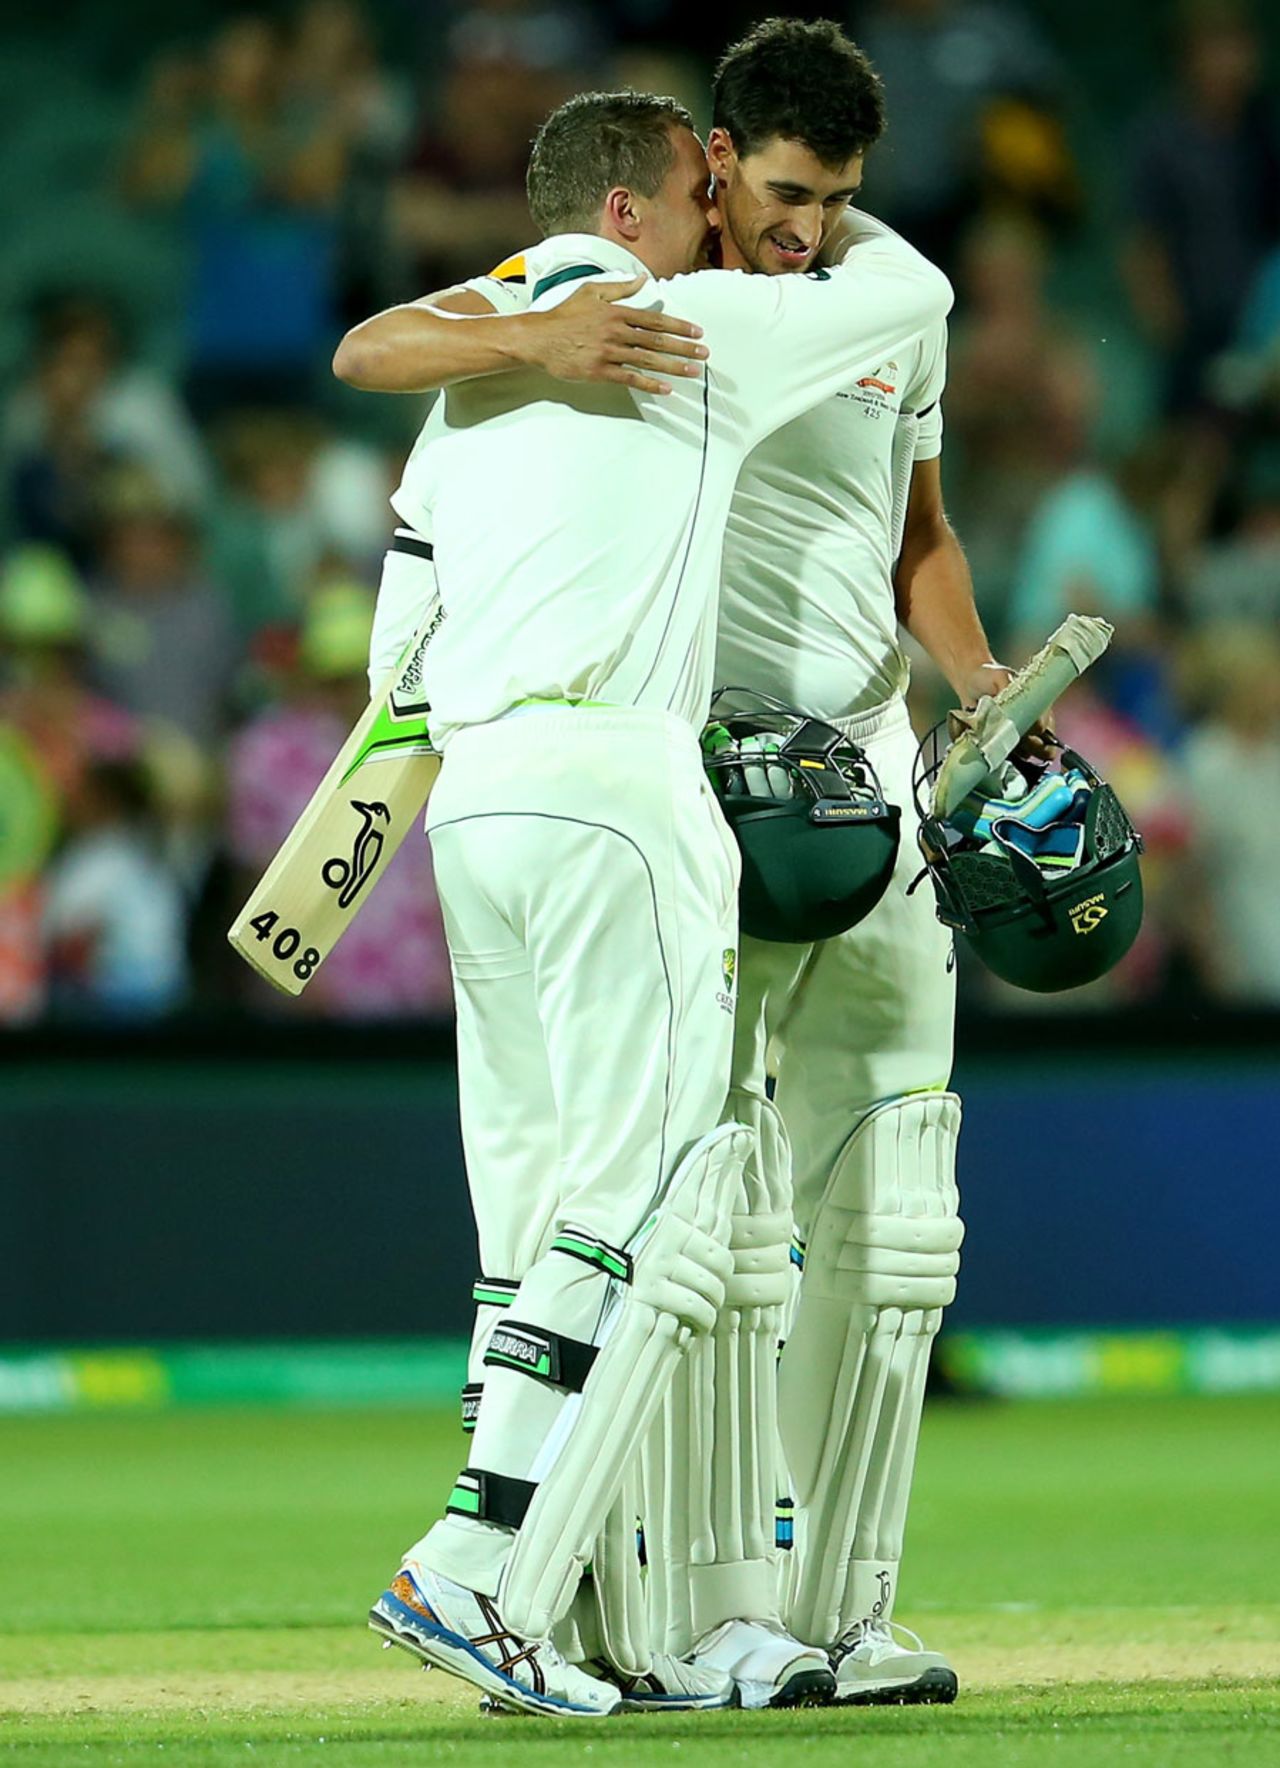 Peter Siddle and Mitchell Starc embrace after a tense finish, Australia v New Zealand, 3rd Test, Adelaide, 3rd day, November 29, 2015